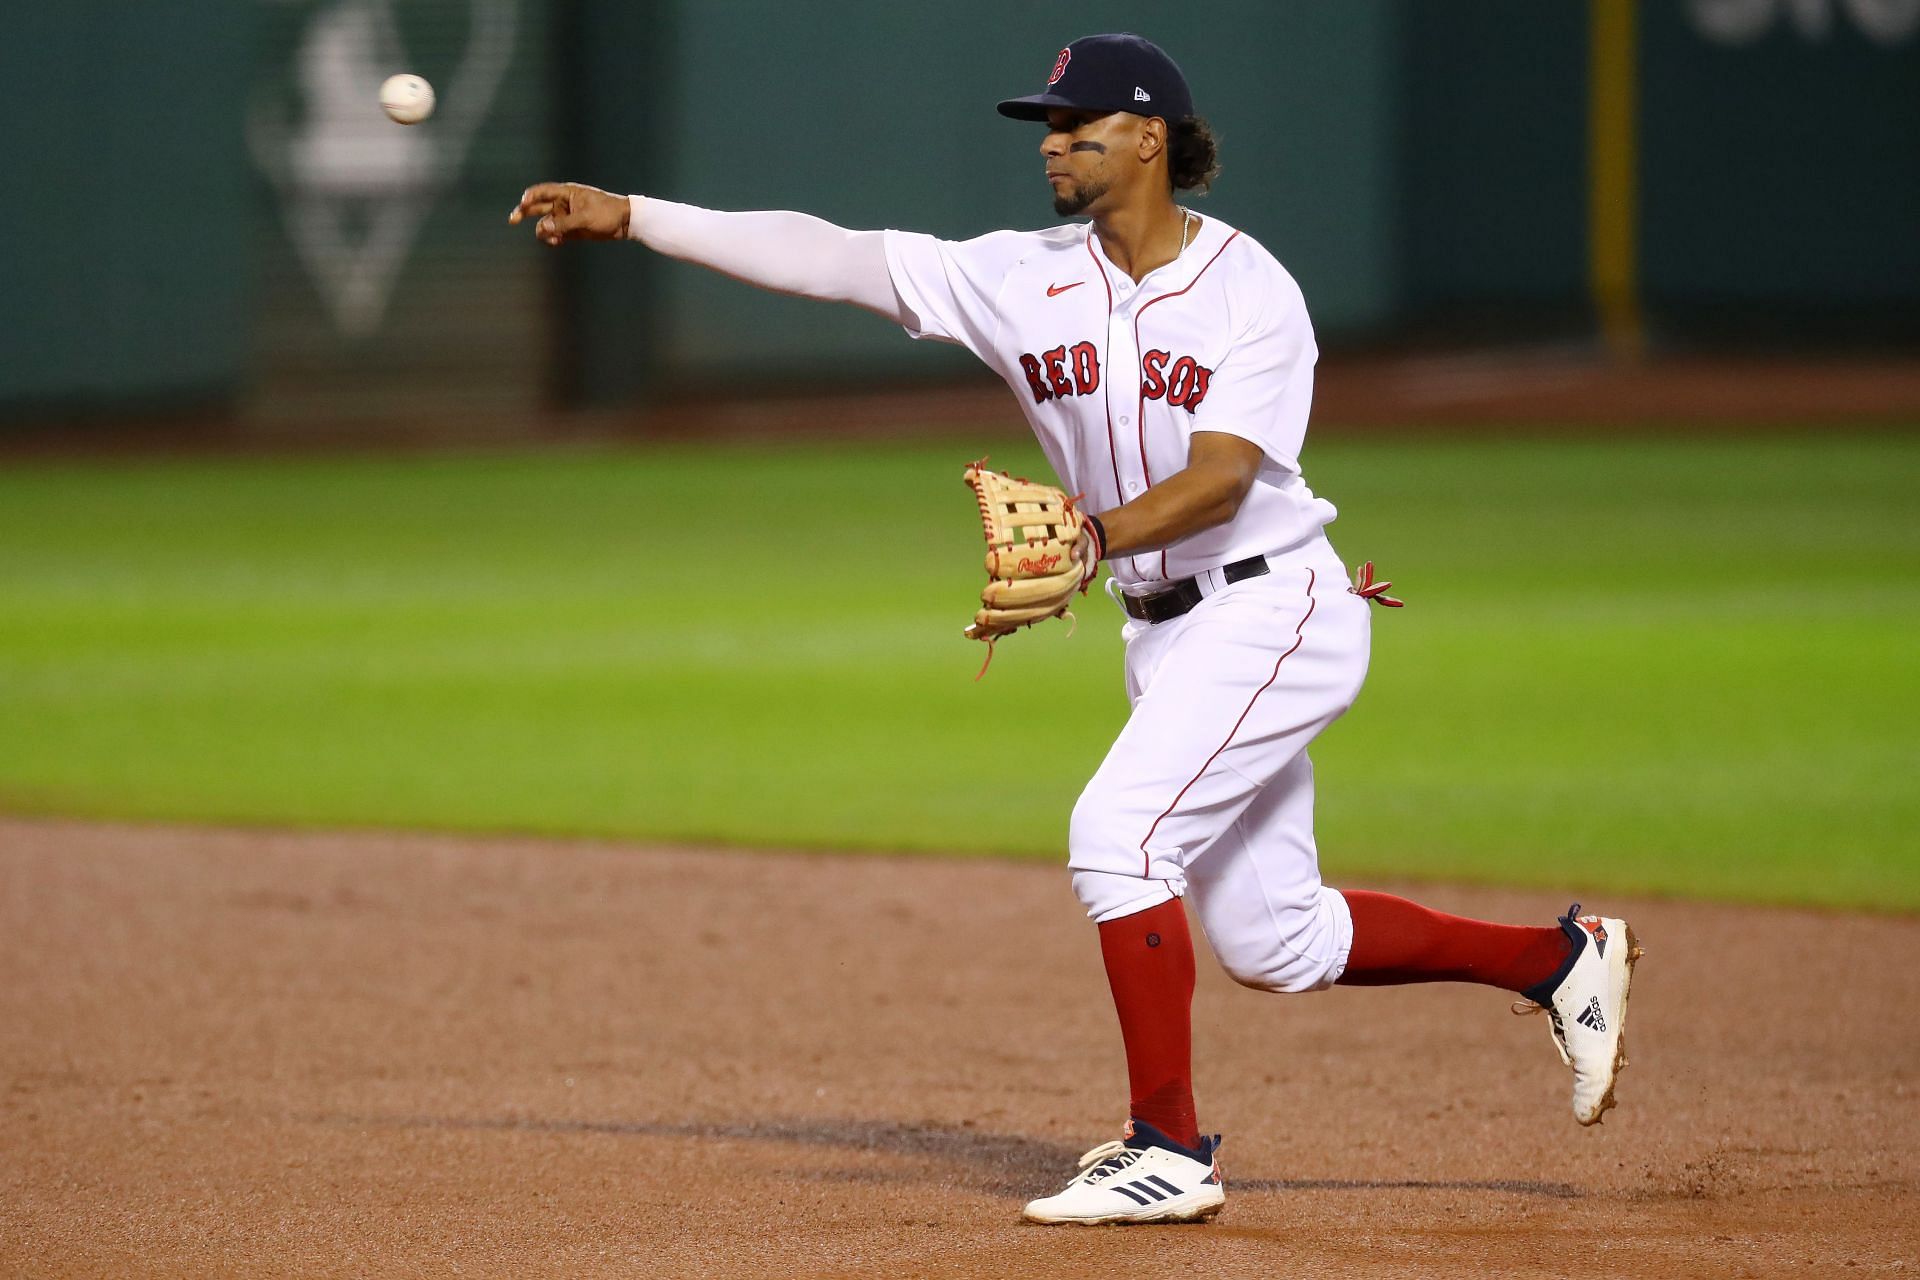 Xander Bogaerts has played his entire Major League career for the Boston Red Sox